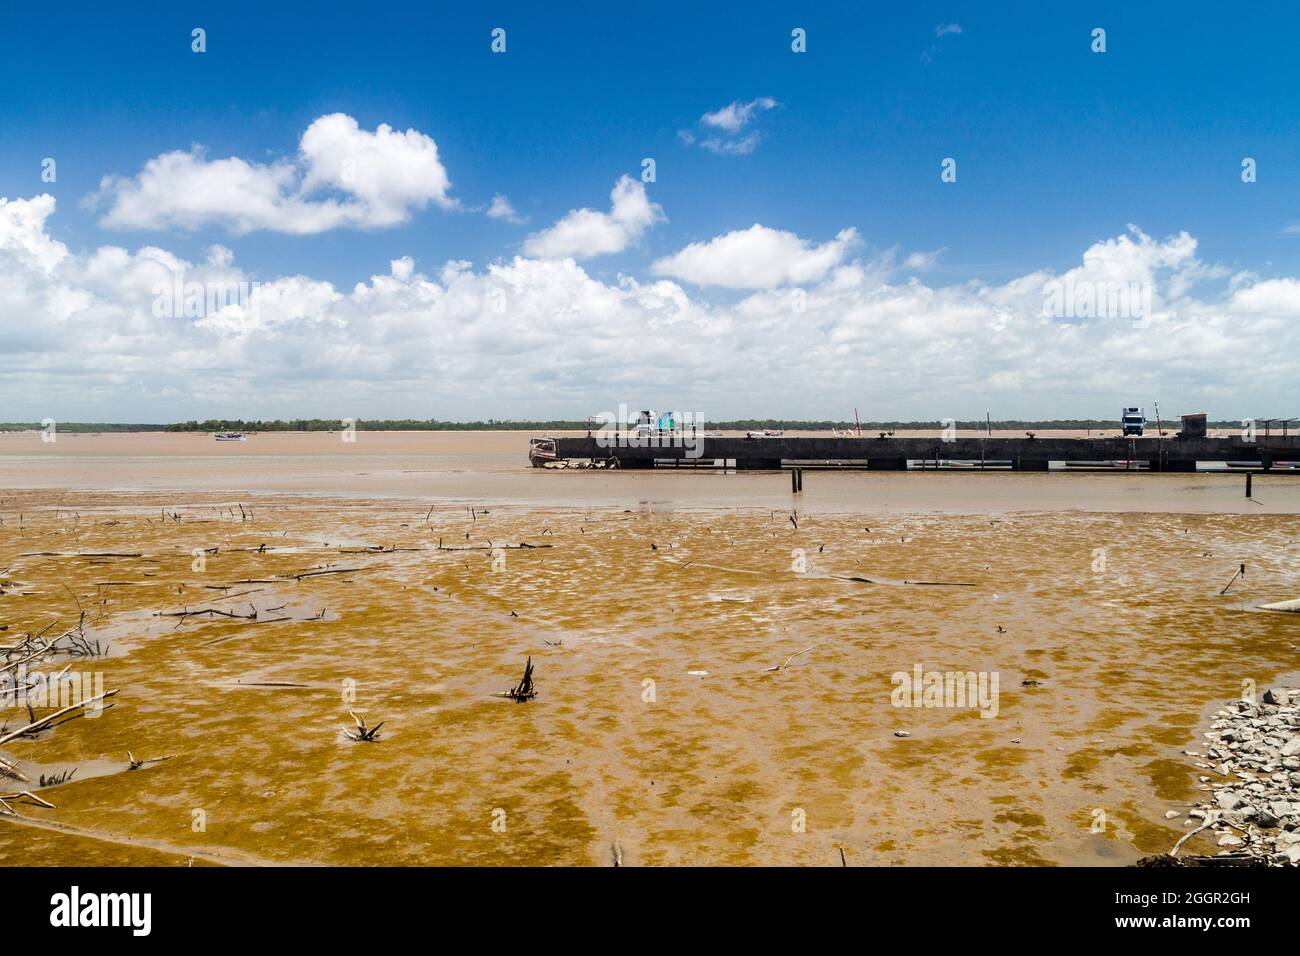 Pier in Cayenne, capital of French Guiana, during the low tide. Stock Photo